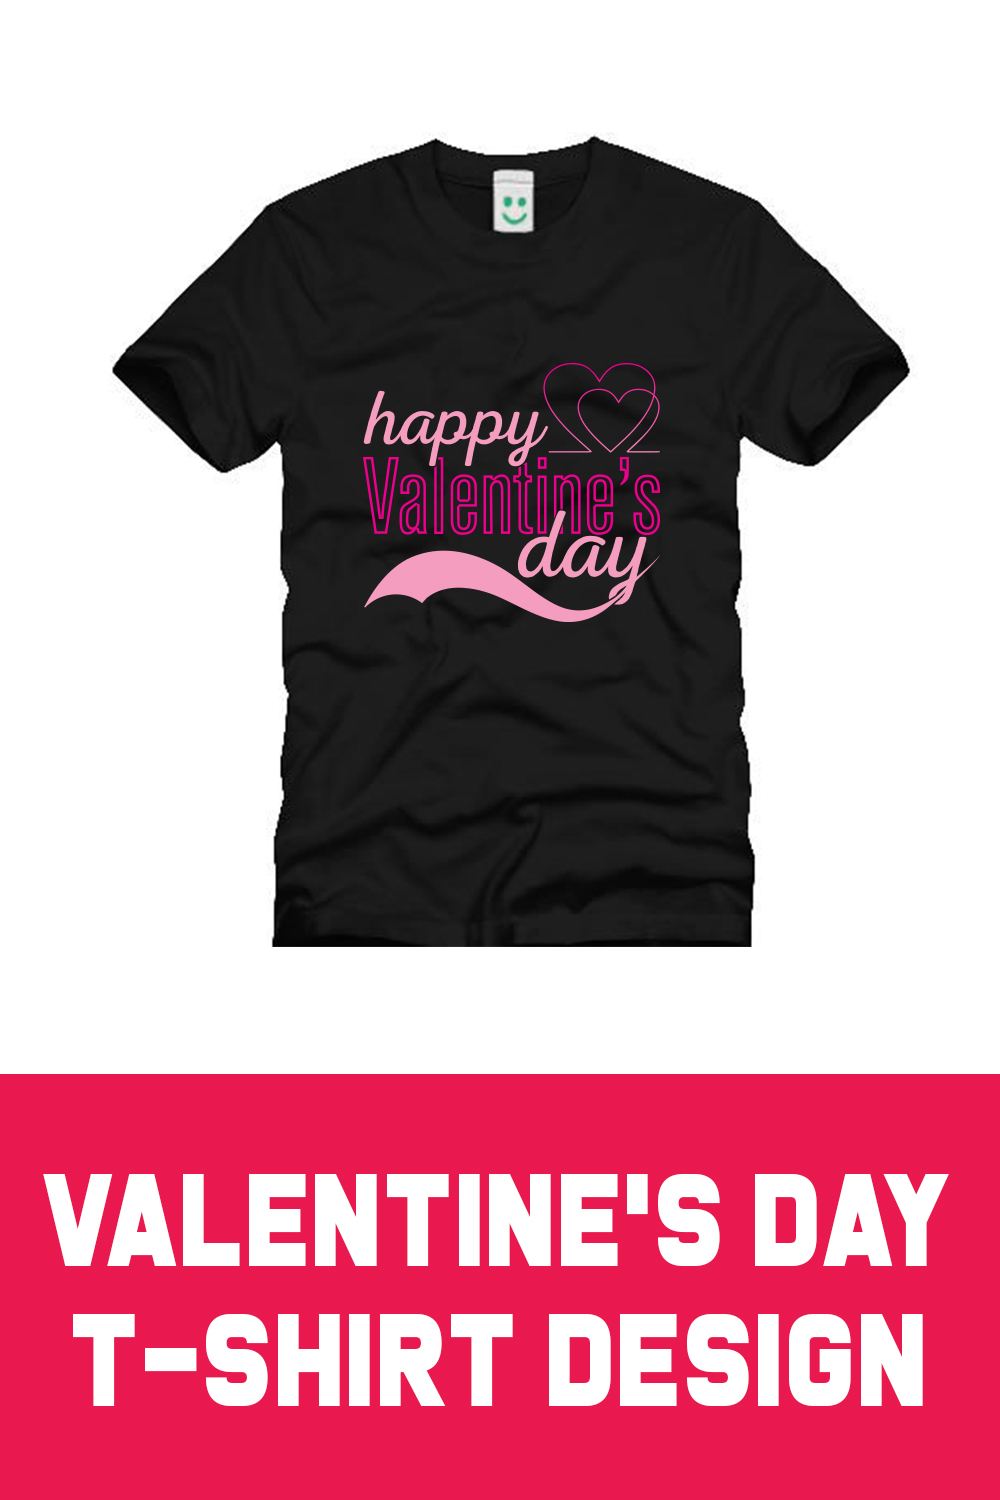 T-shirt image with a unique inscription happy valentines day